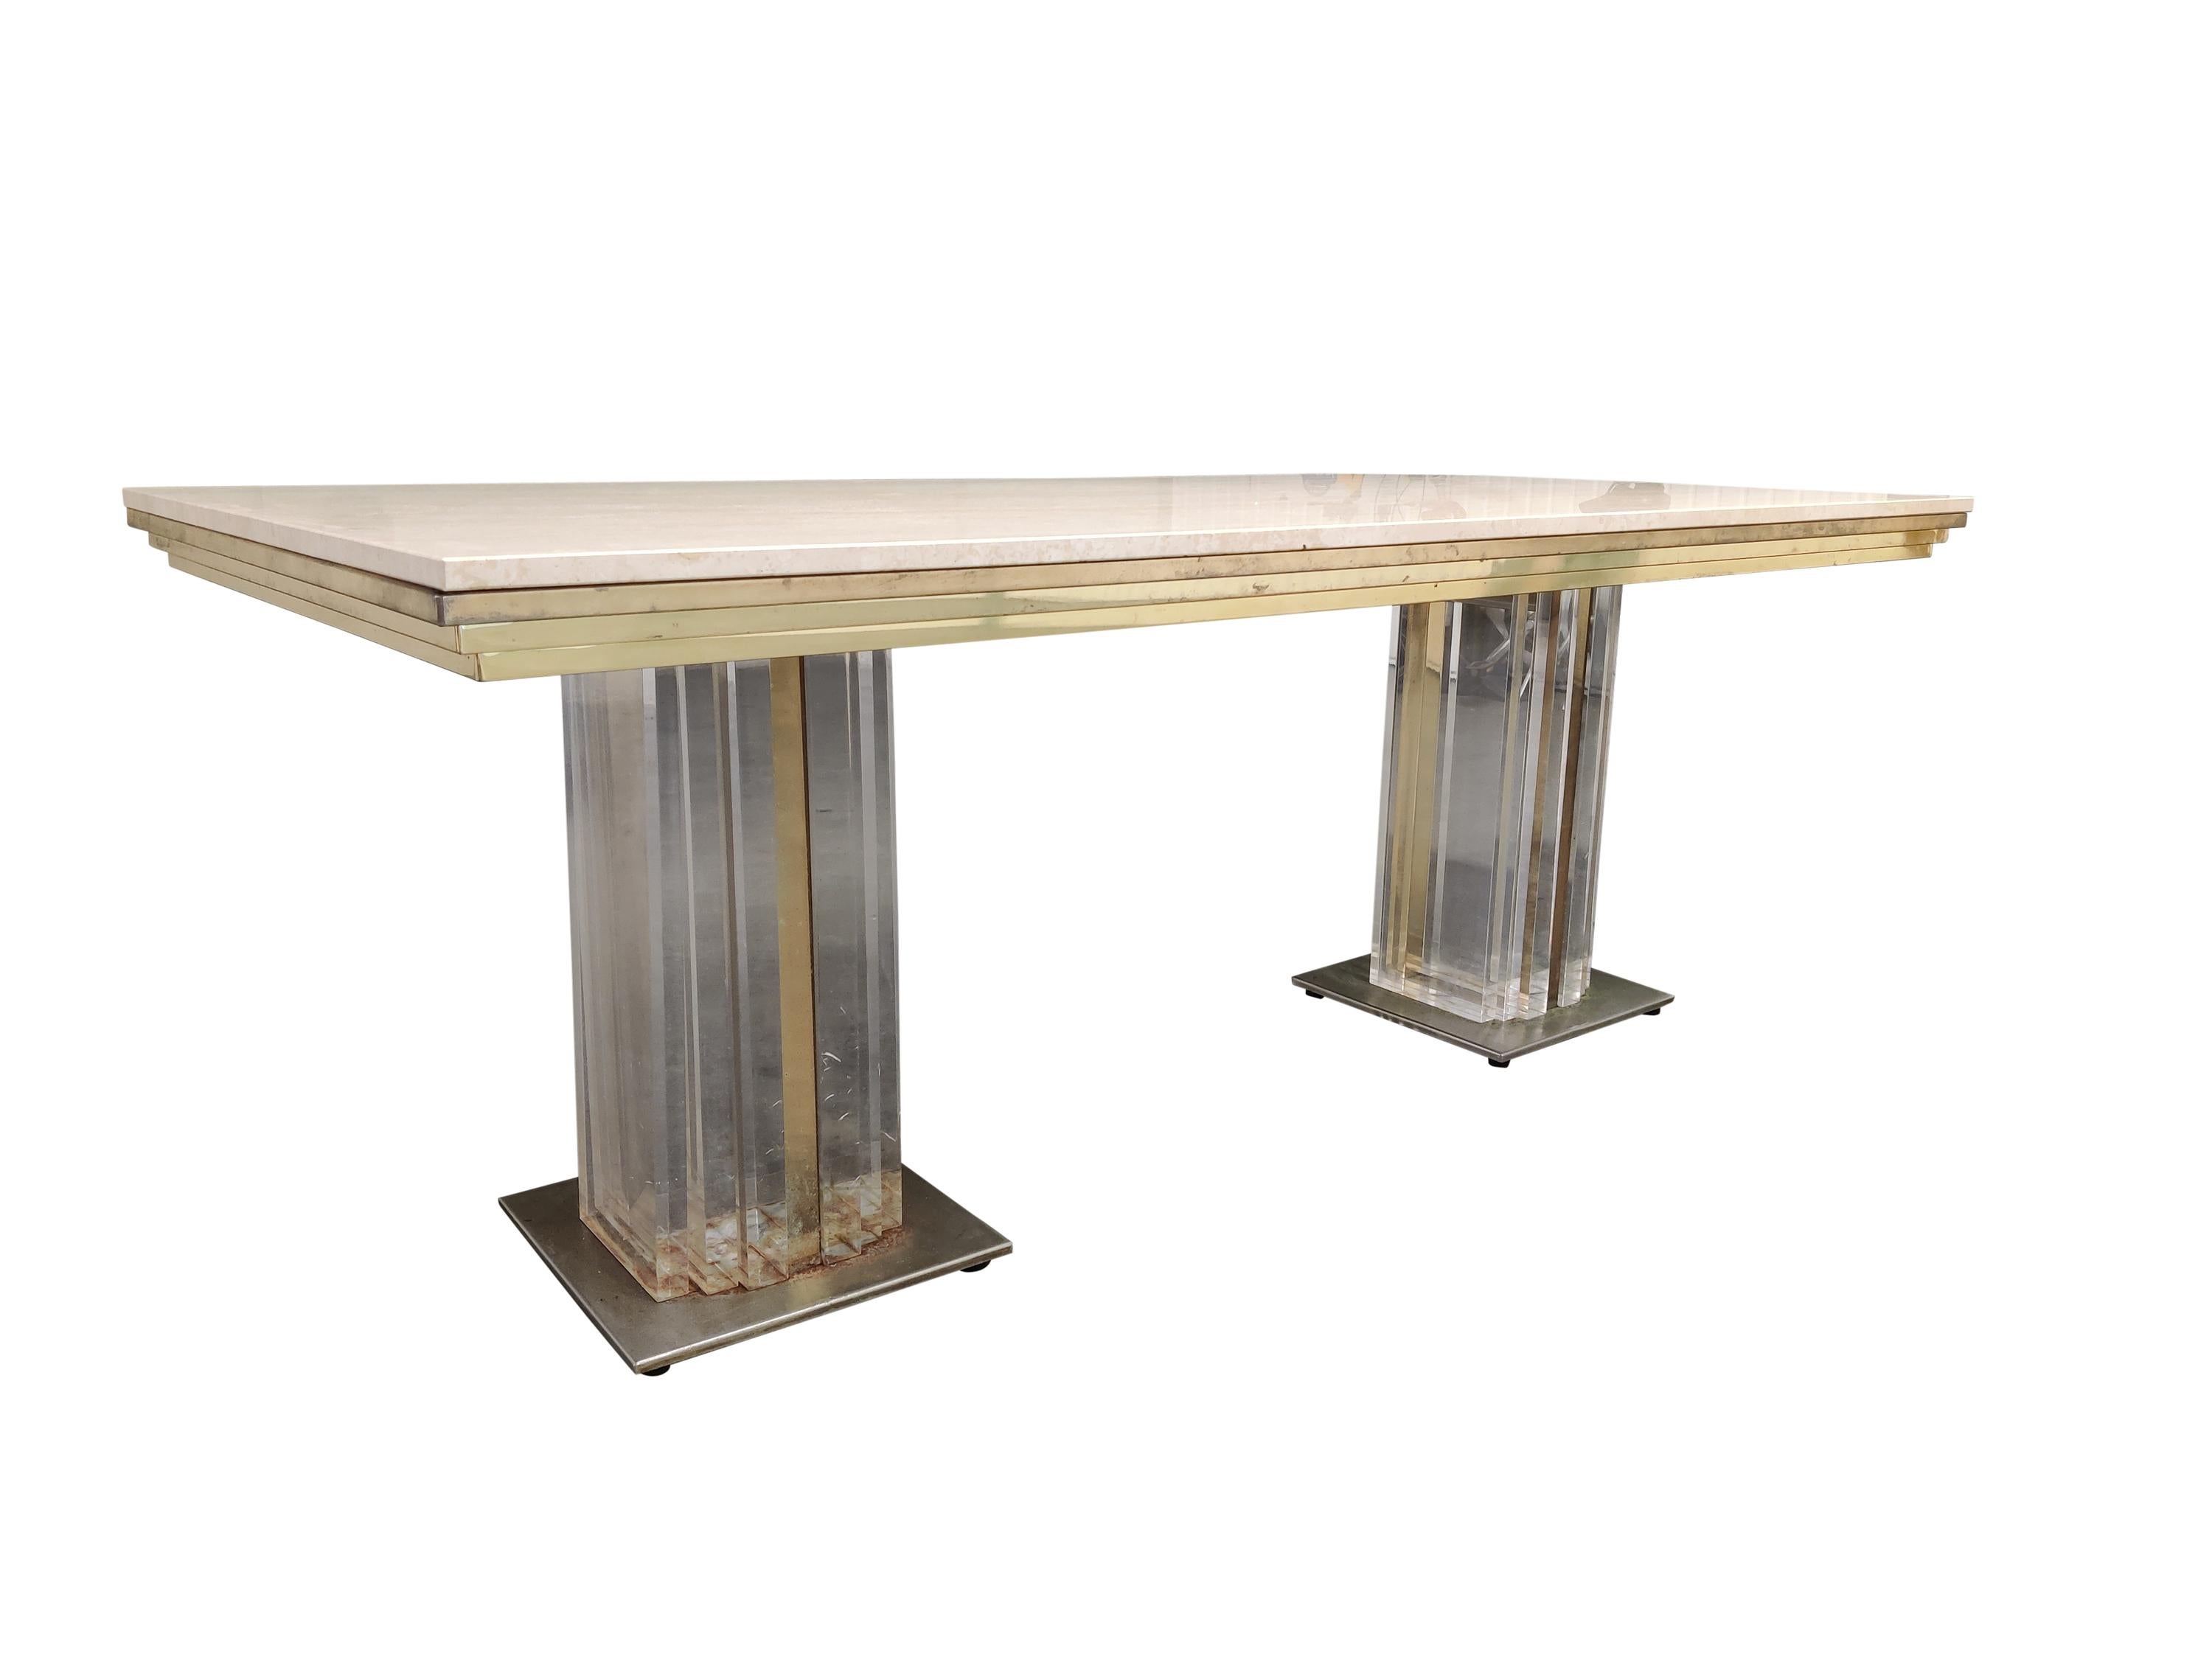 Vintage Lucite, Brass and Travertine Dining Table, 1970s For Sale 3